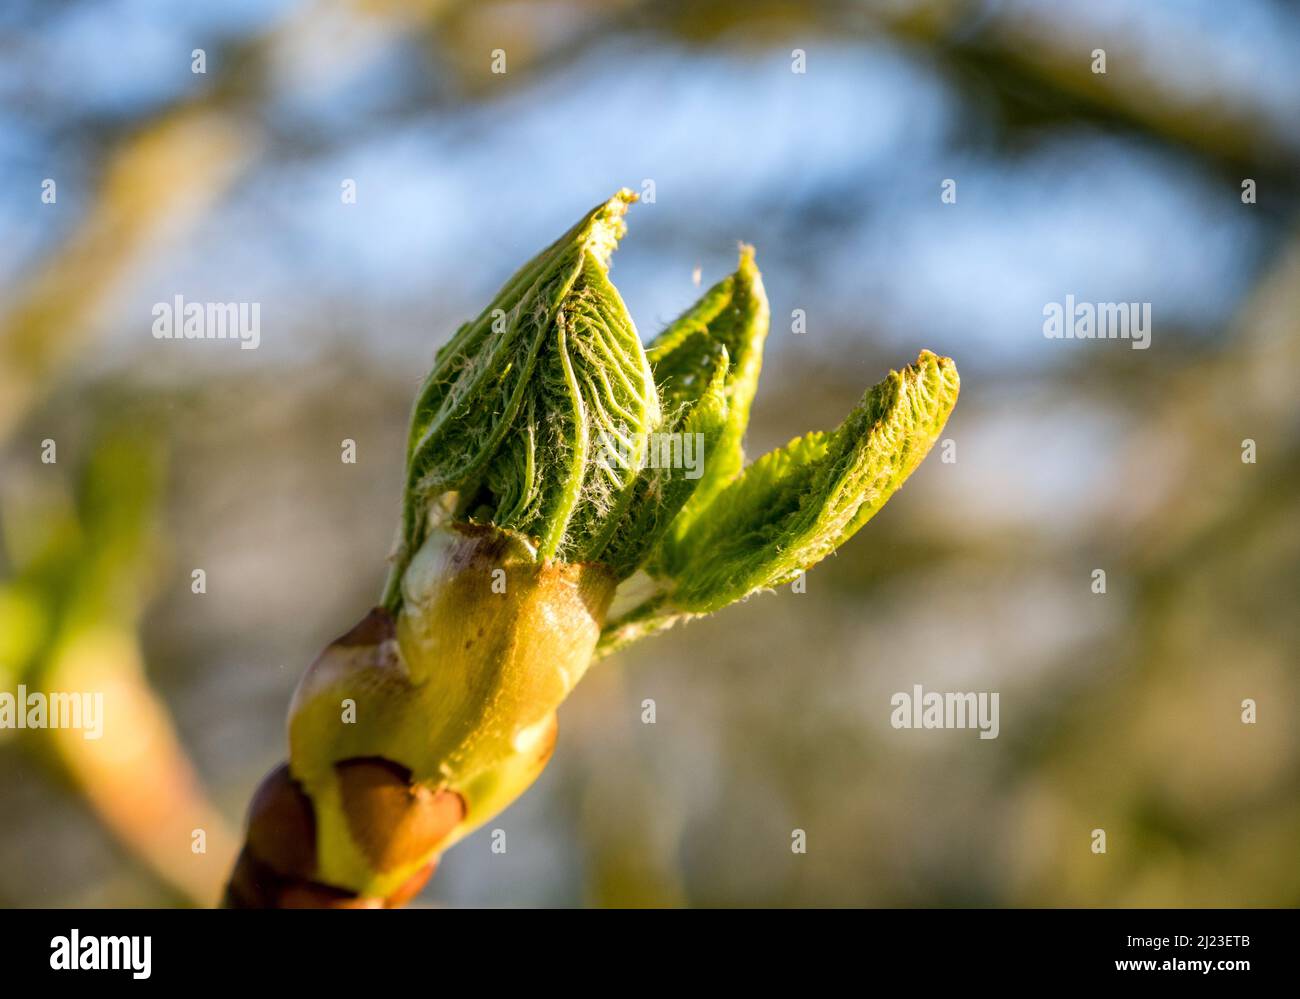 UK, England, Devonshire. A Horse Chestnut tree sticky bud opening in the spring. Stock Photo